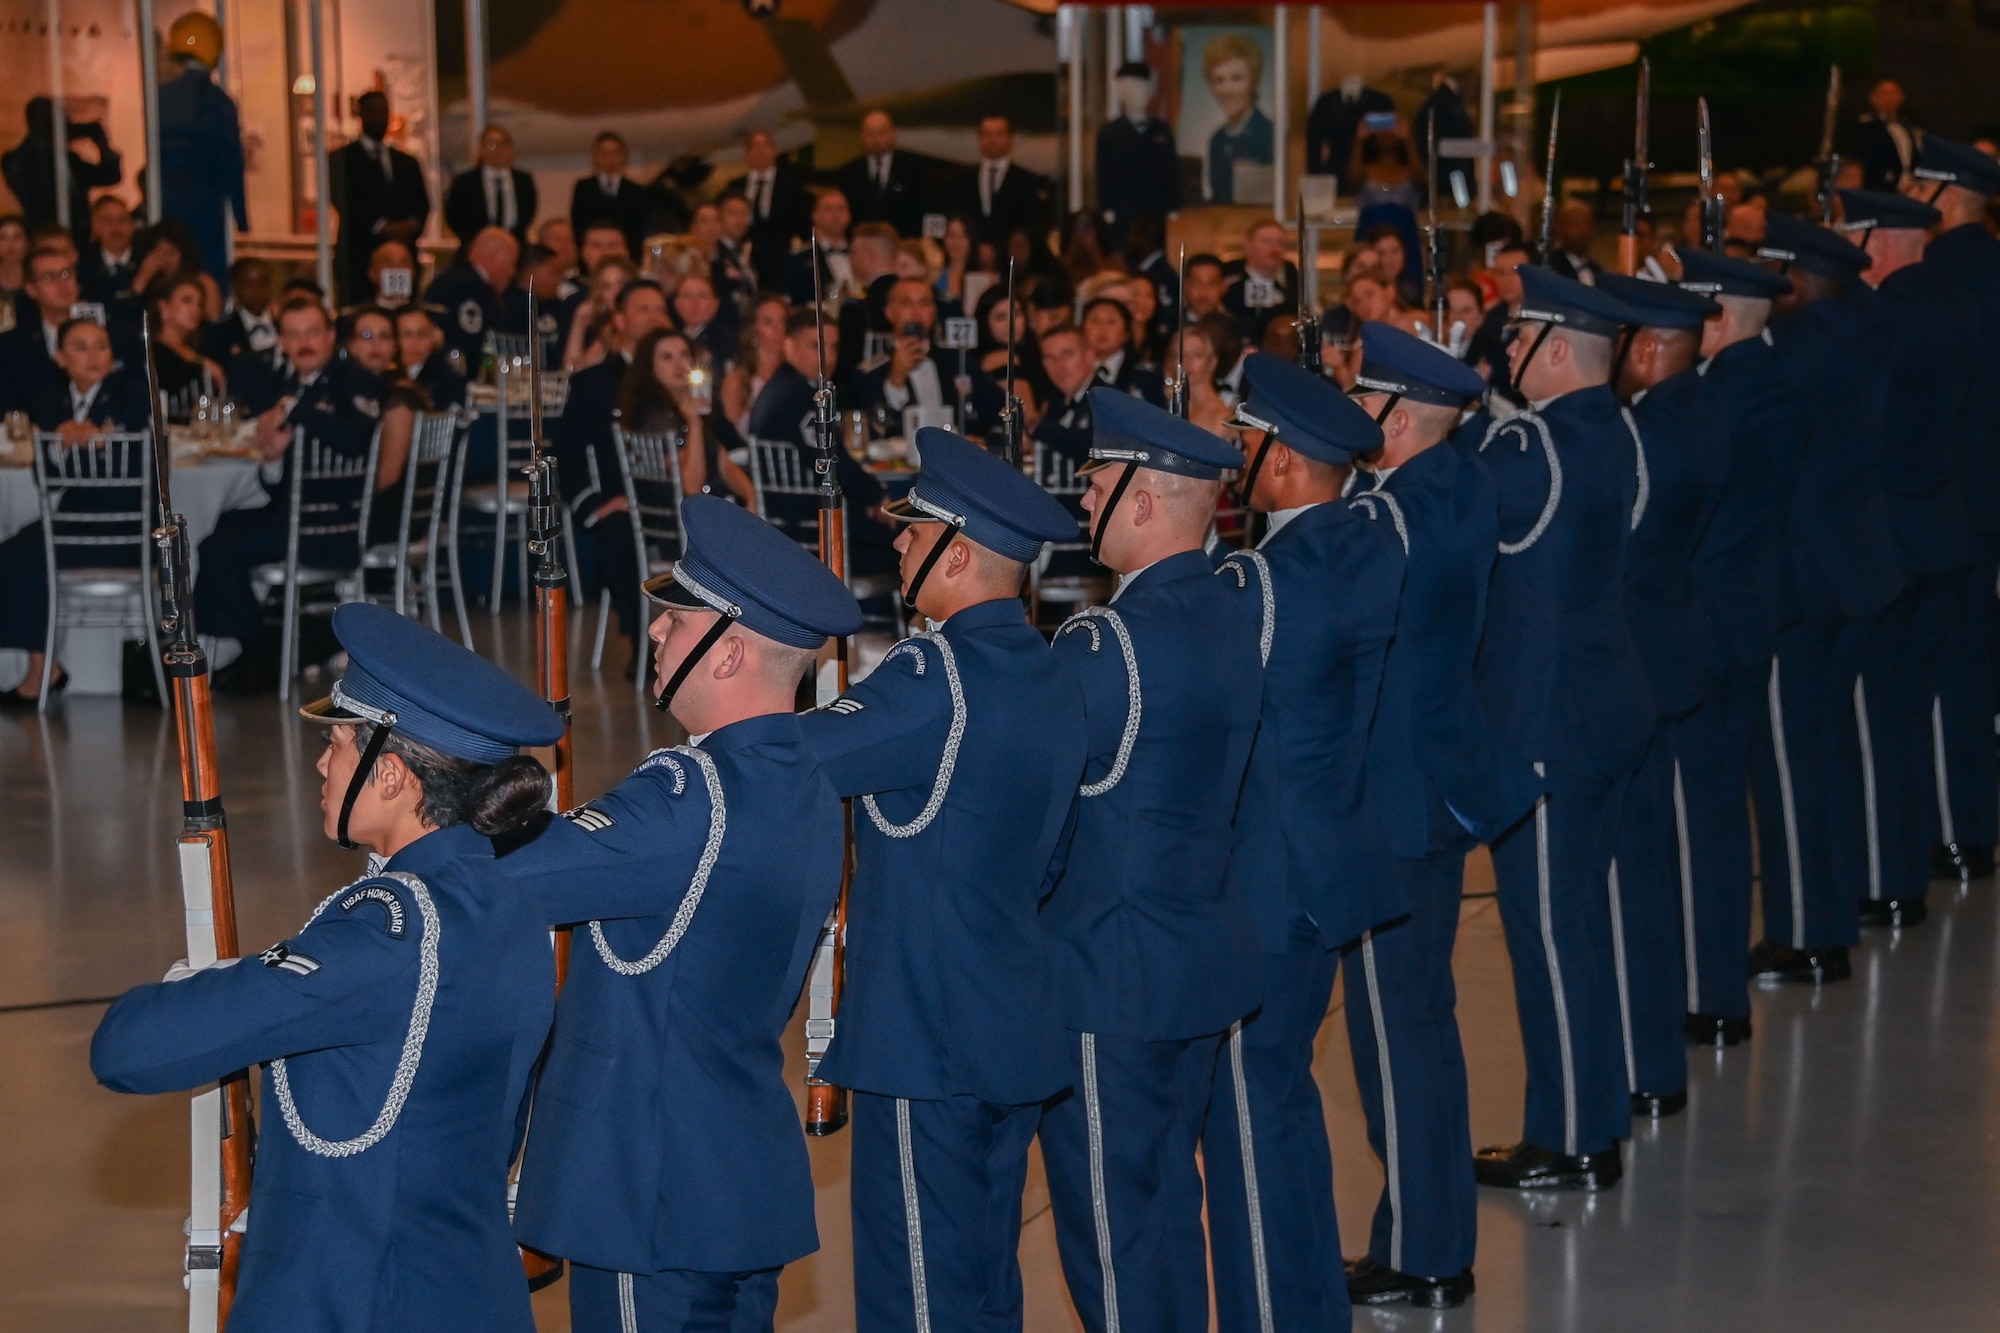 Military members in uniform standing in a line.